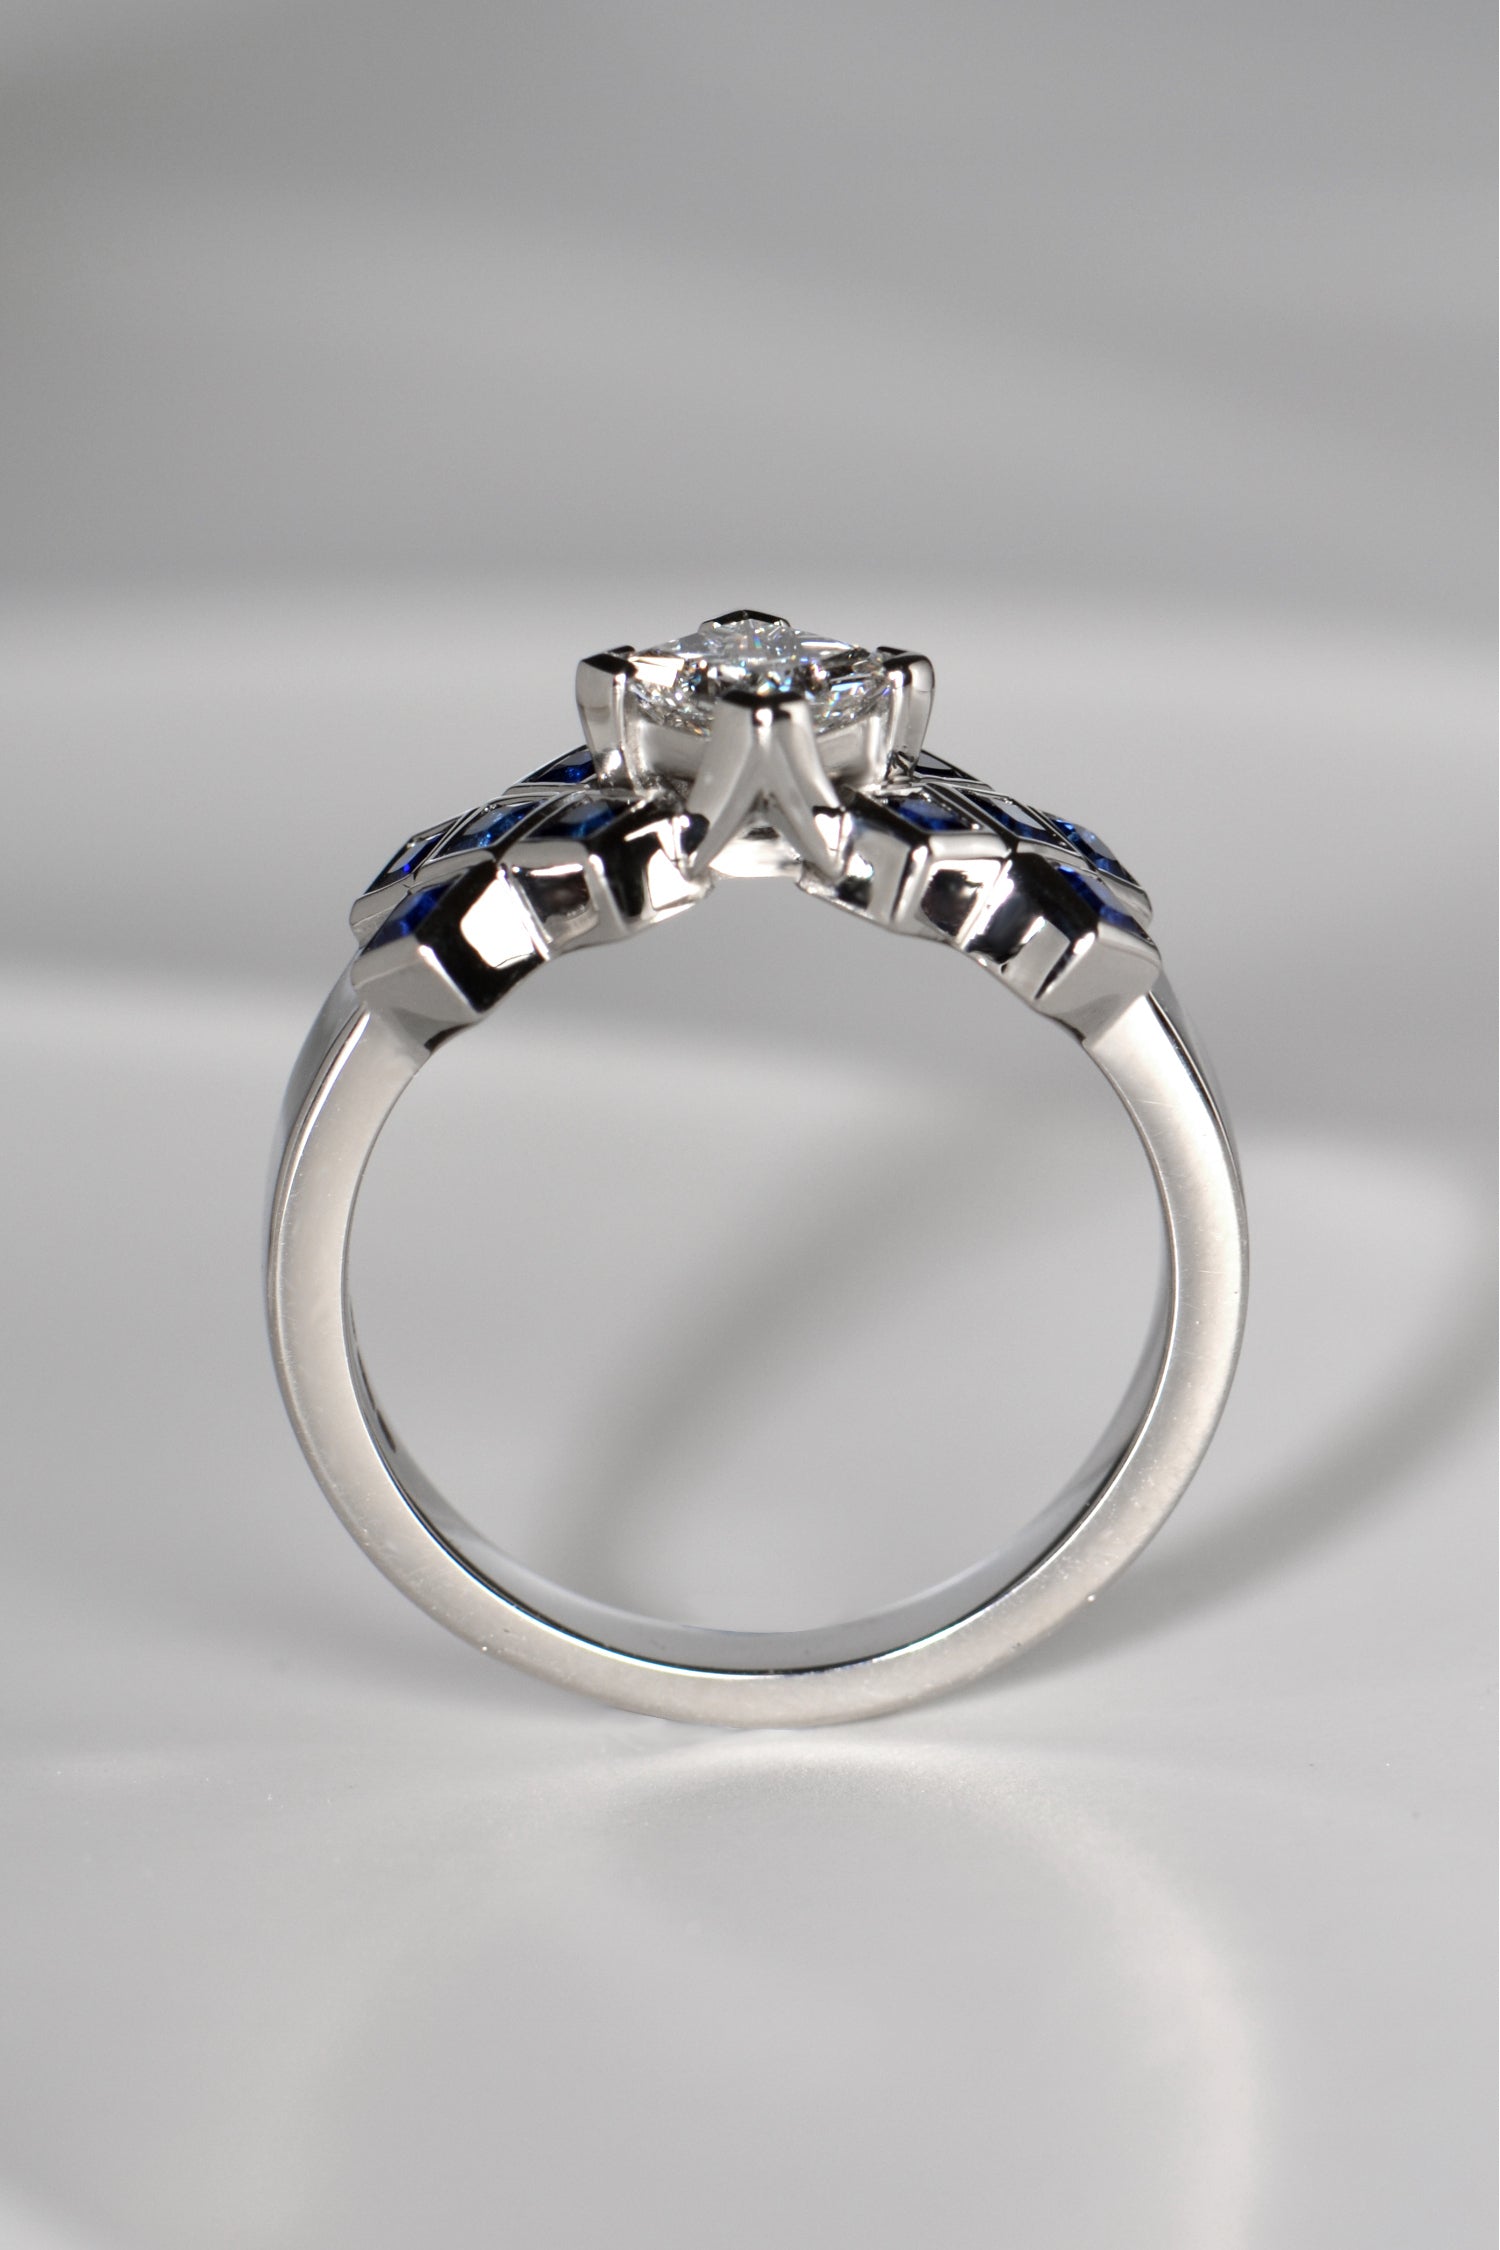 The diamond in the tartan ring is set higher than the sapphires so it looks like a rock rising out of a sapphire sea.